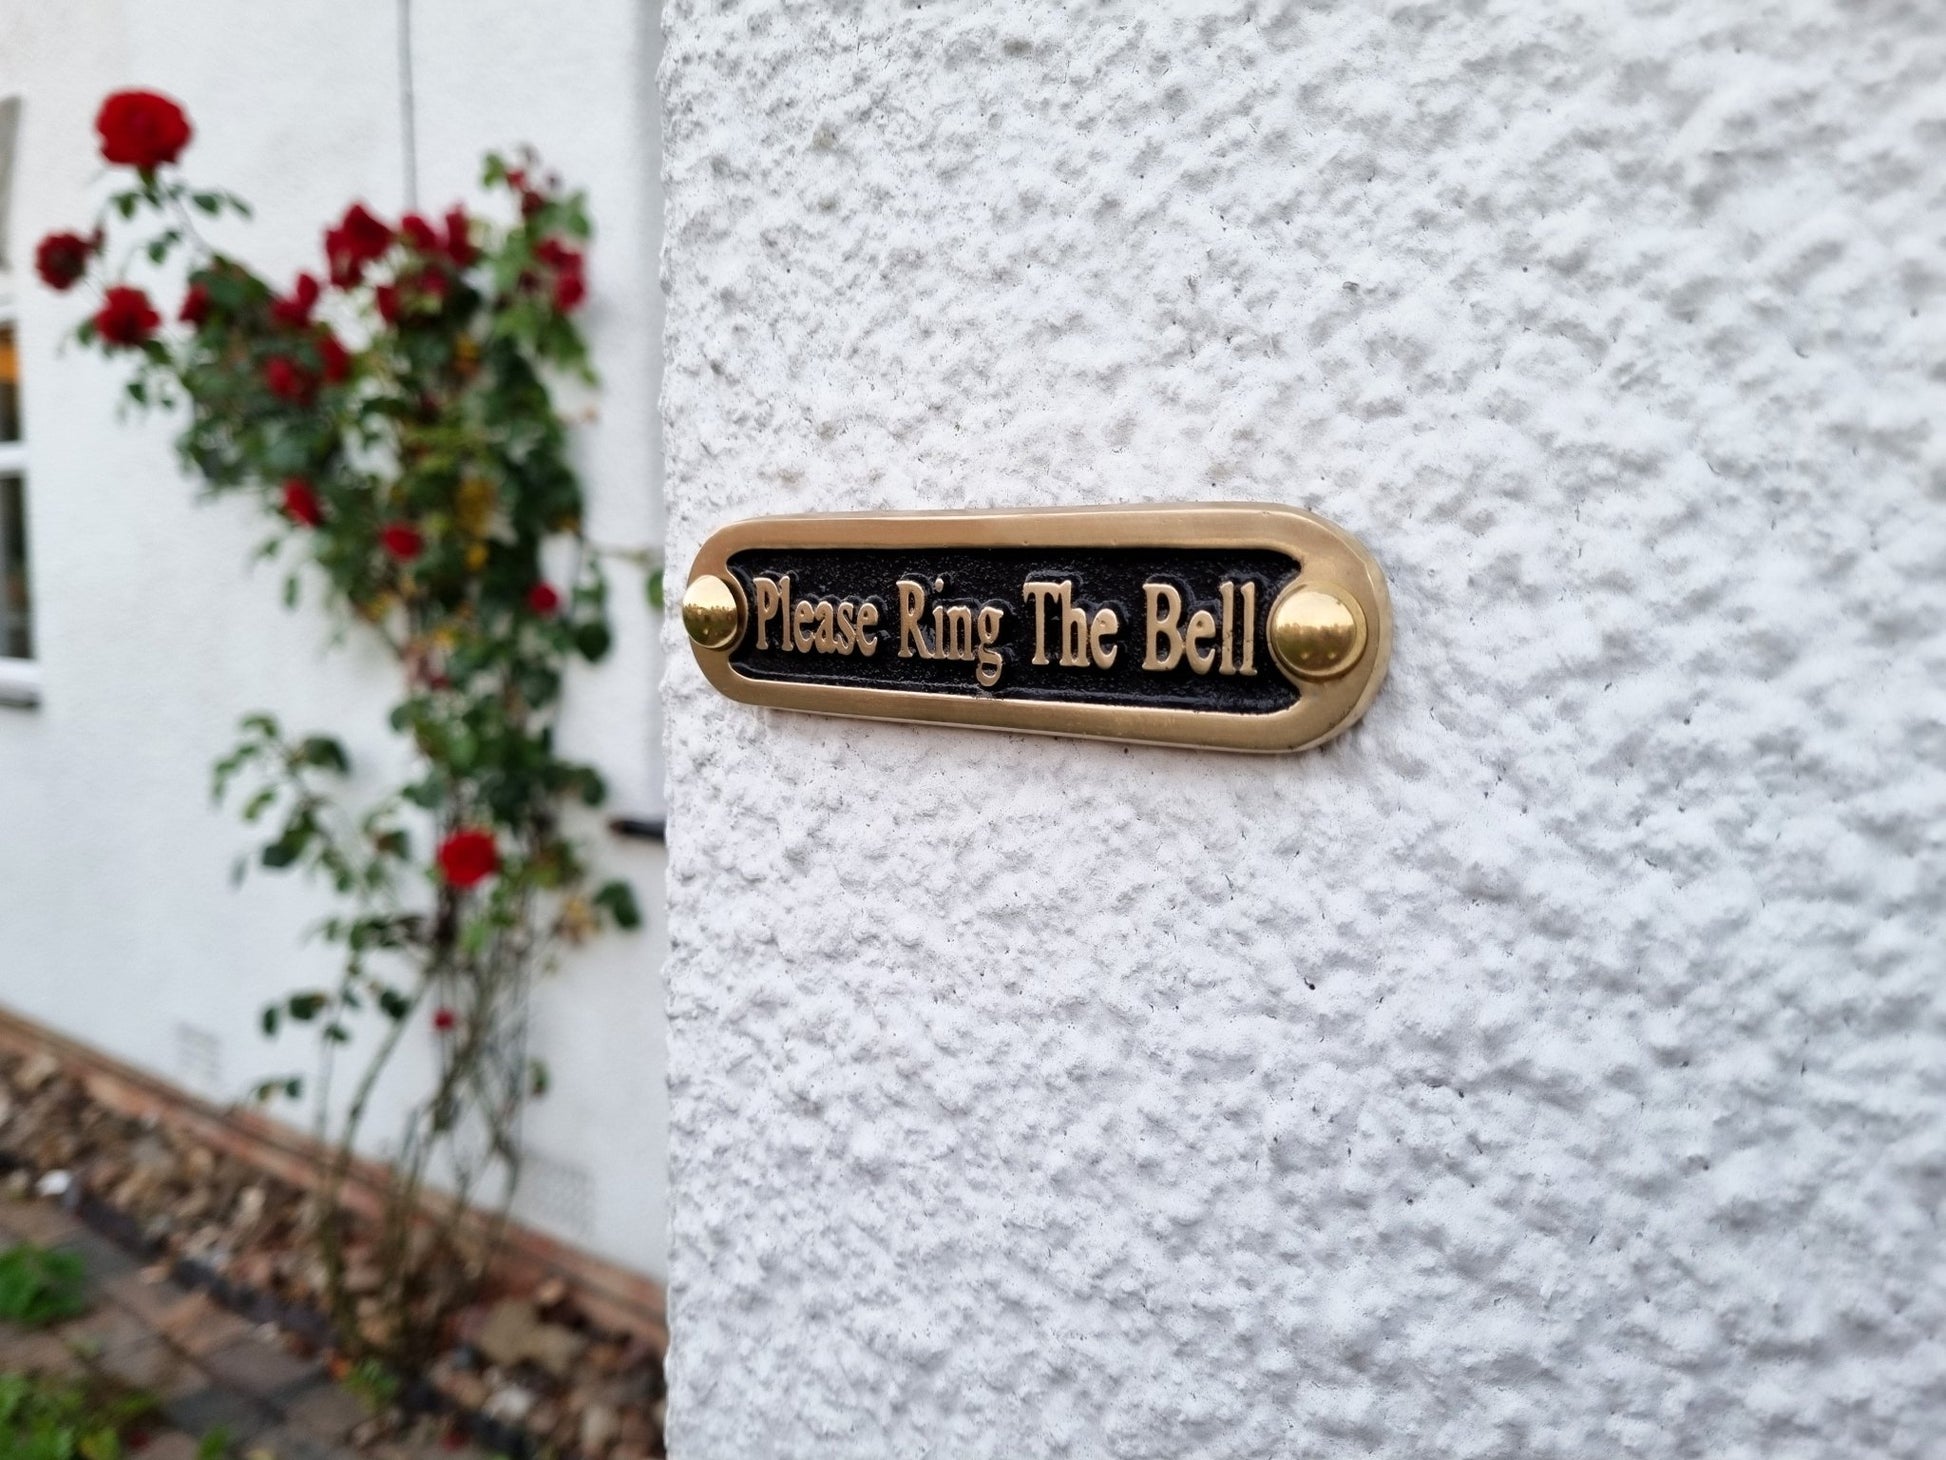 'Please Ring The Bell' Door Sign - The Metal Foundry